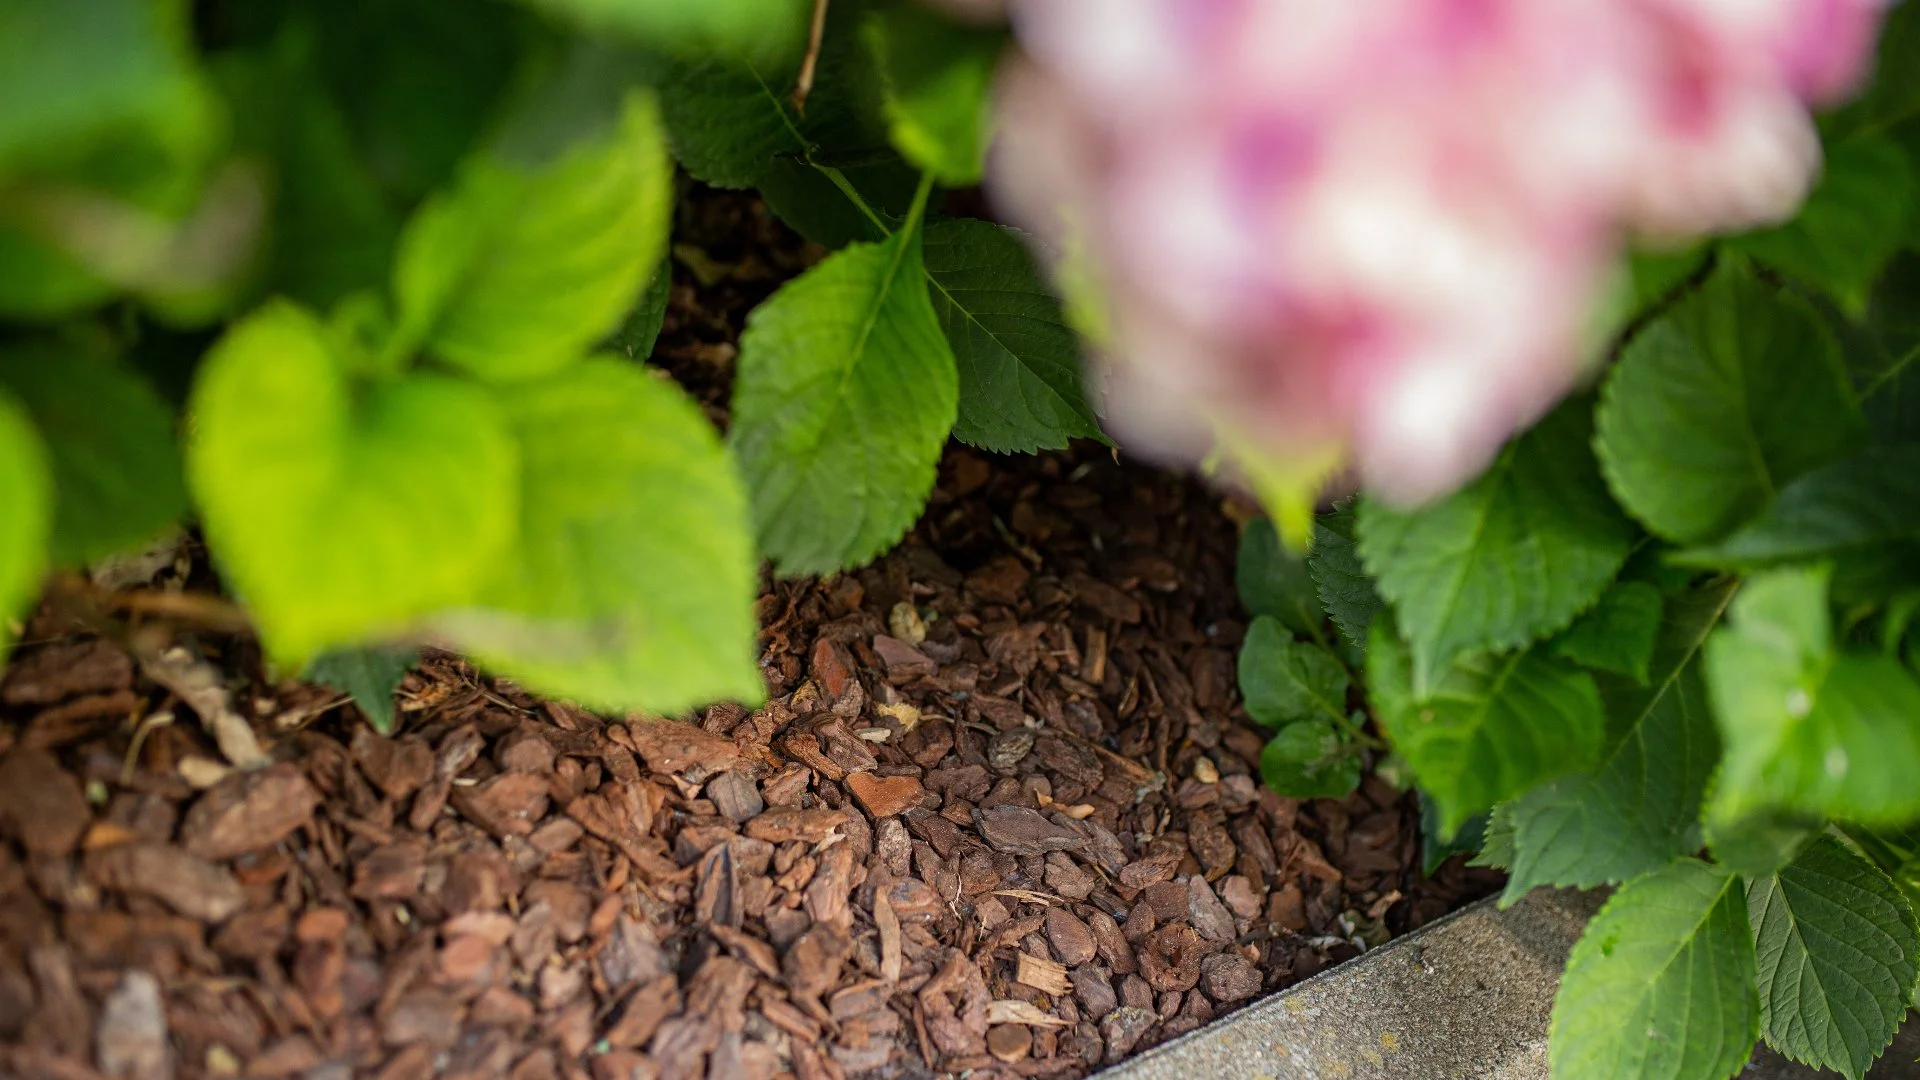 Make Sure to Refresh Your Mulch So Your Plants Benefit From This Ground Cover!